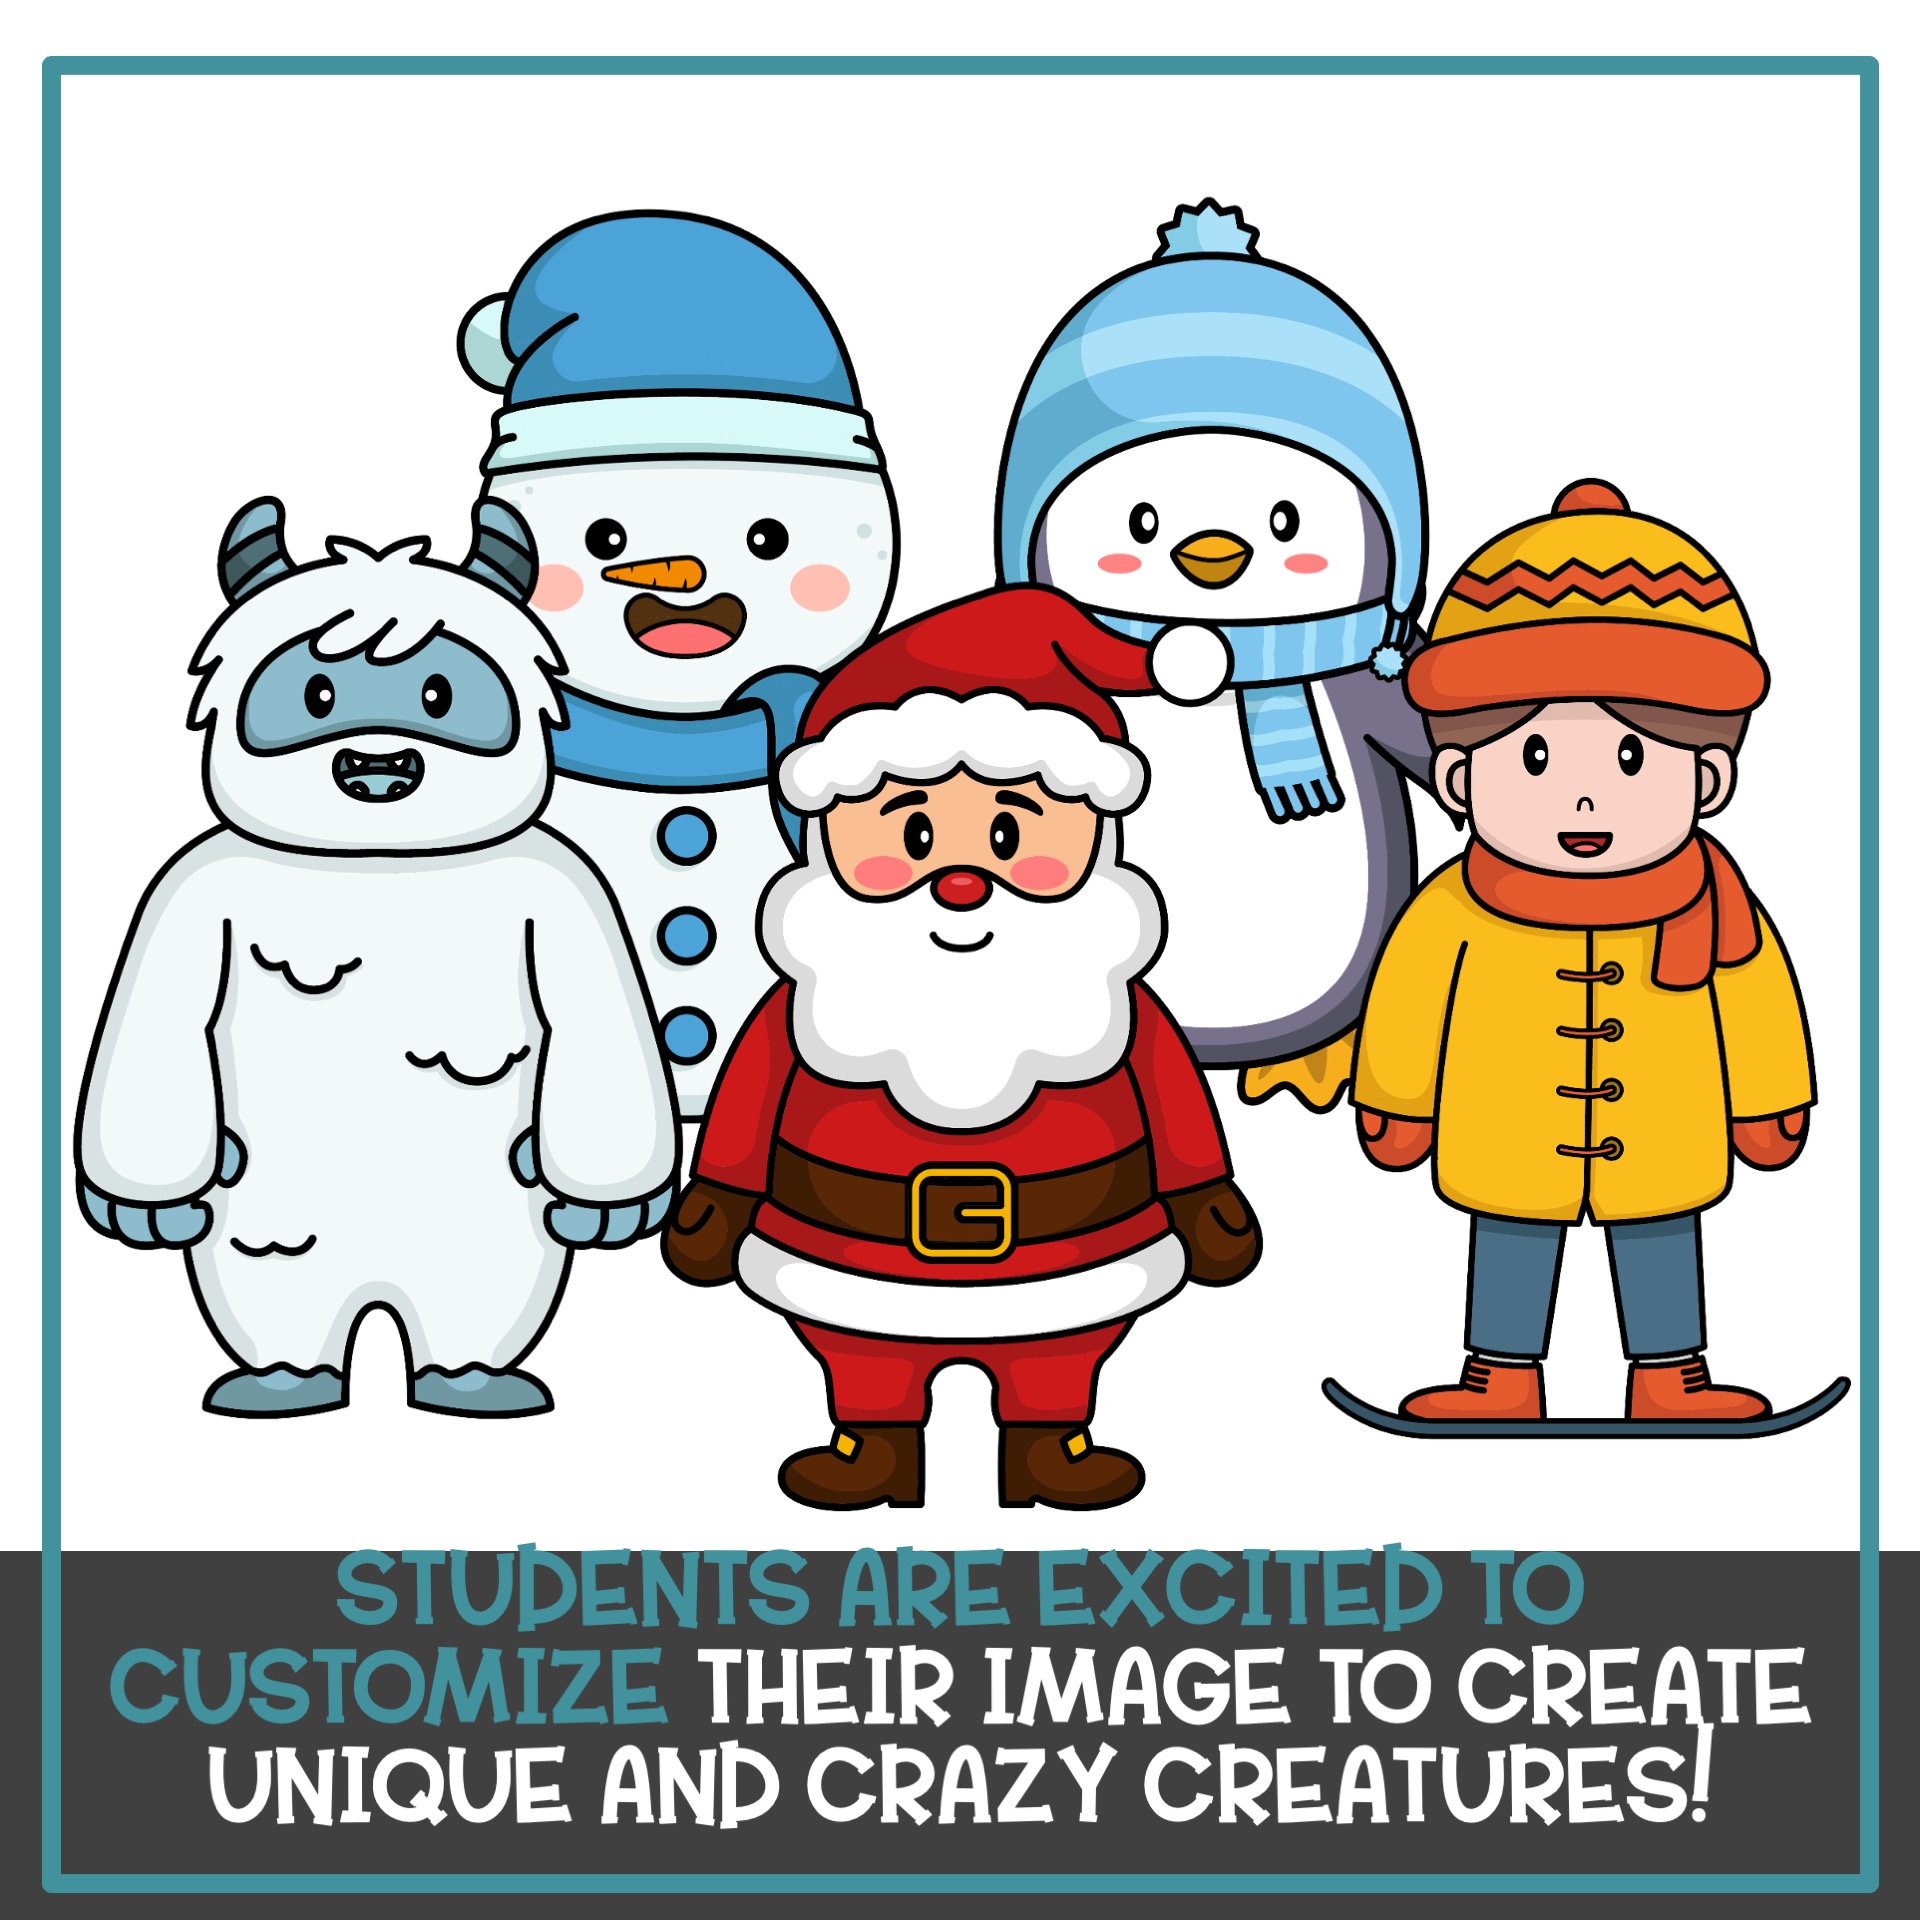 Sales Tax and Tip Holiday Crazy Creatures Self-Checking Google Sheets Activity's featured image